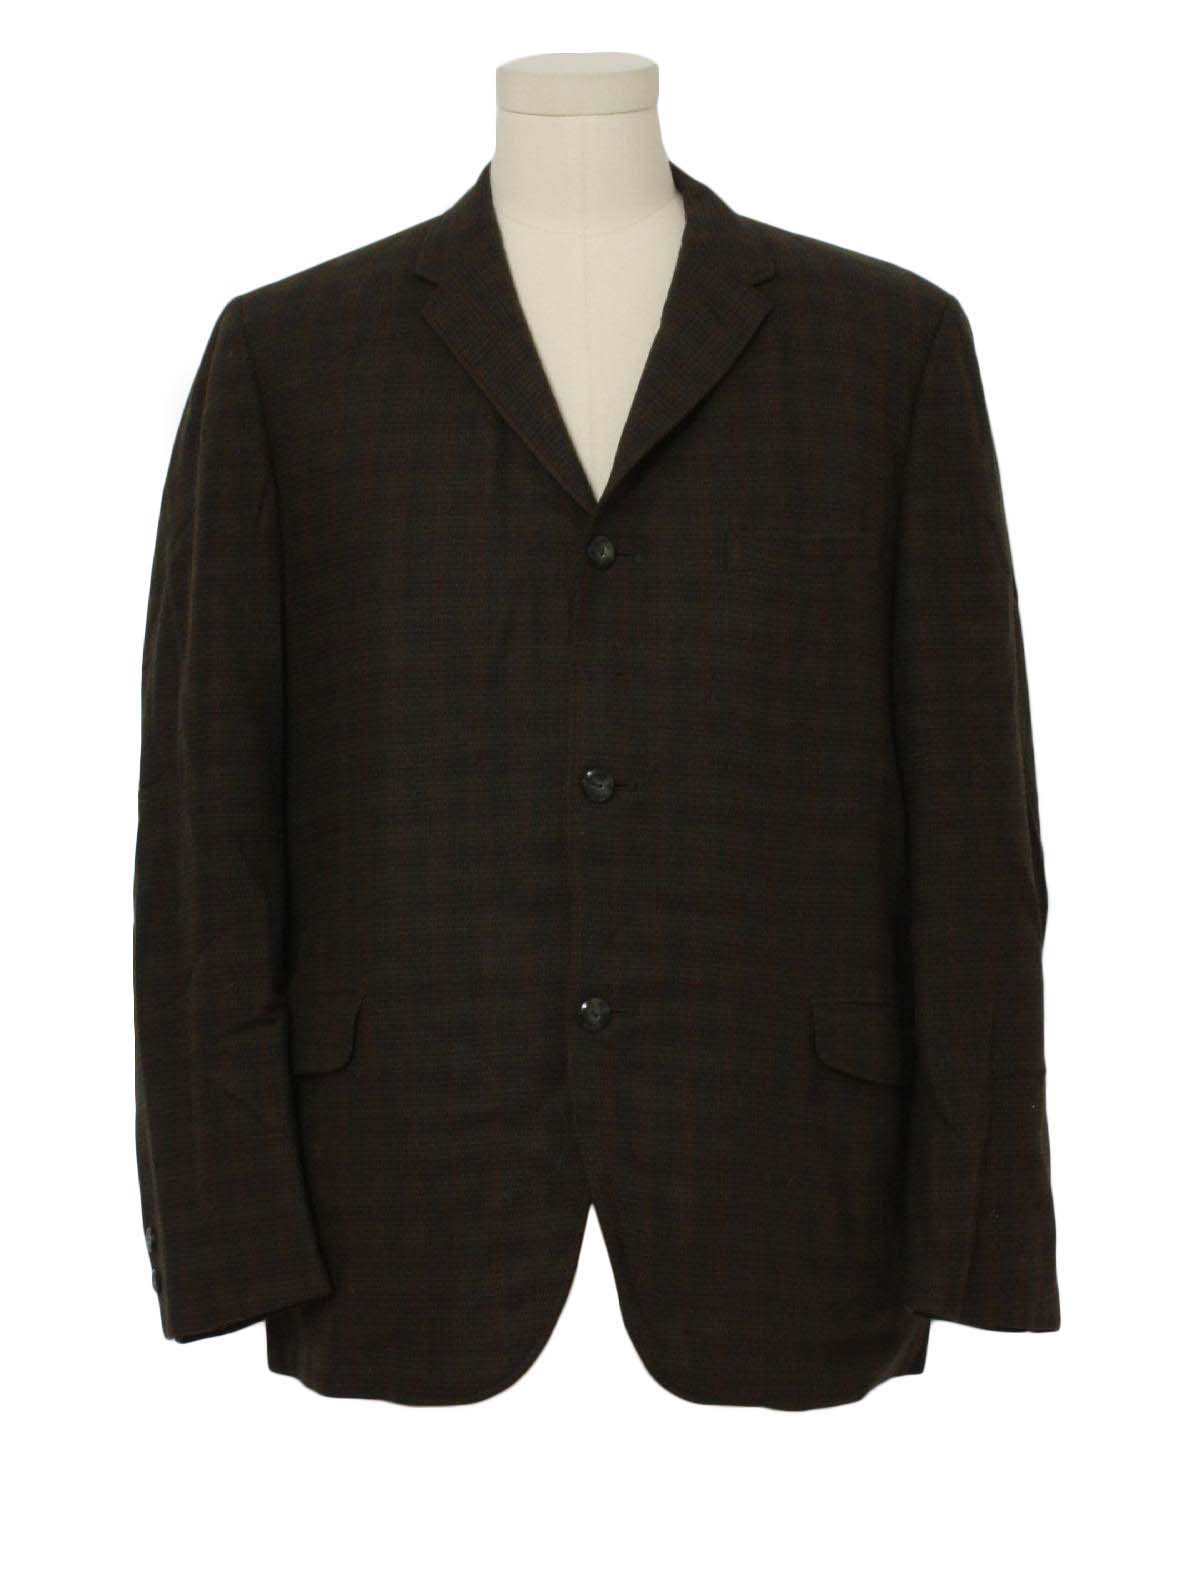 Retro 1960s Jacket: 60s -Foreman and Clark- Mens shade brown, green and ...